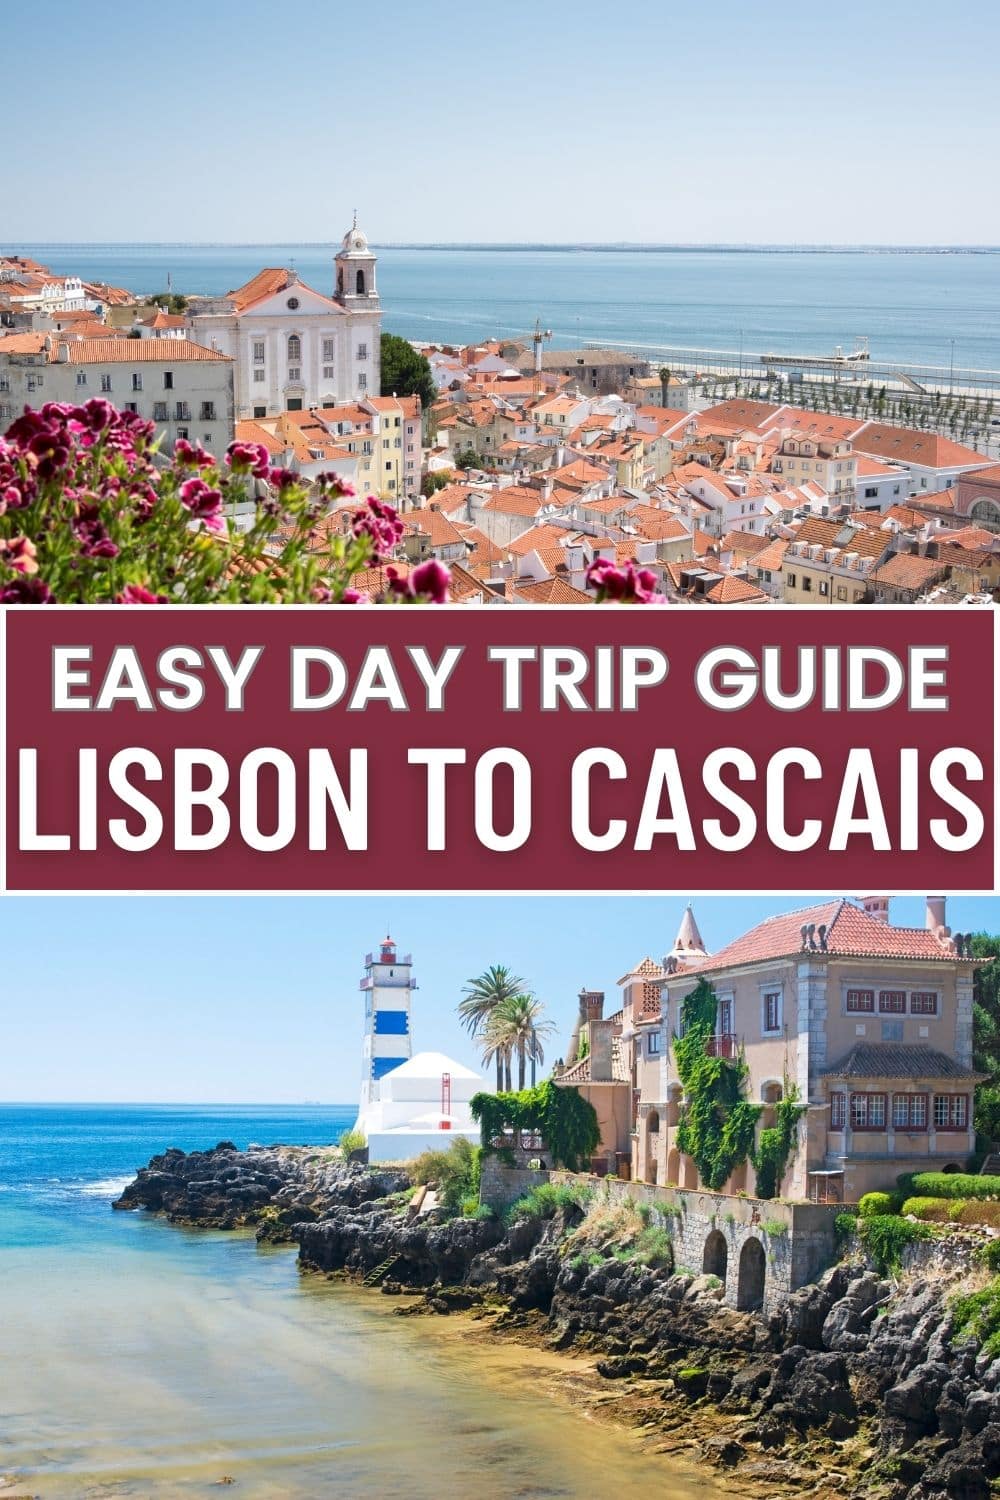 This is another promotional travel guide image emphasizing an easy day trip from Lisbon to Cascais. The text at the top, set against a maroon background, says "EASY DAY TRIP GUIDE LISBON TO CASCAIS". The photo montage features two different views: the upper part of the image showcases a panoramic view of Lisbon's historic architecture, with a church and red rooftops extending towards a body of water.